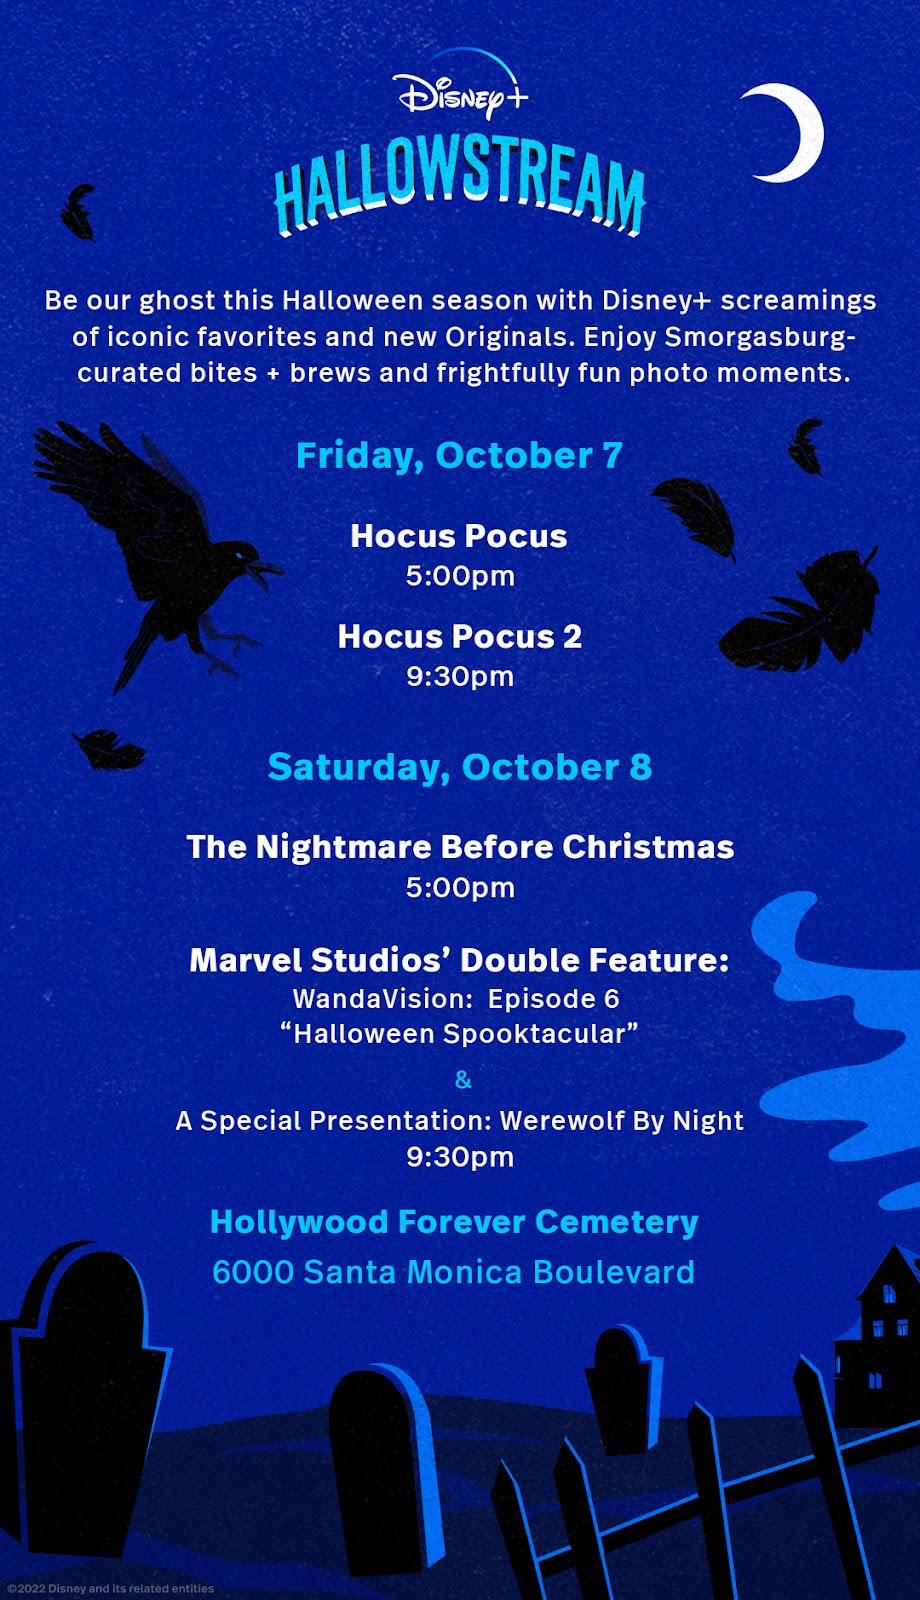 Disney+ Screening Hocus Pocus 2, Werewolf by Night, and More at Hollywood Forever Cemetery